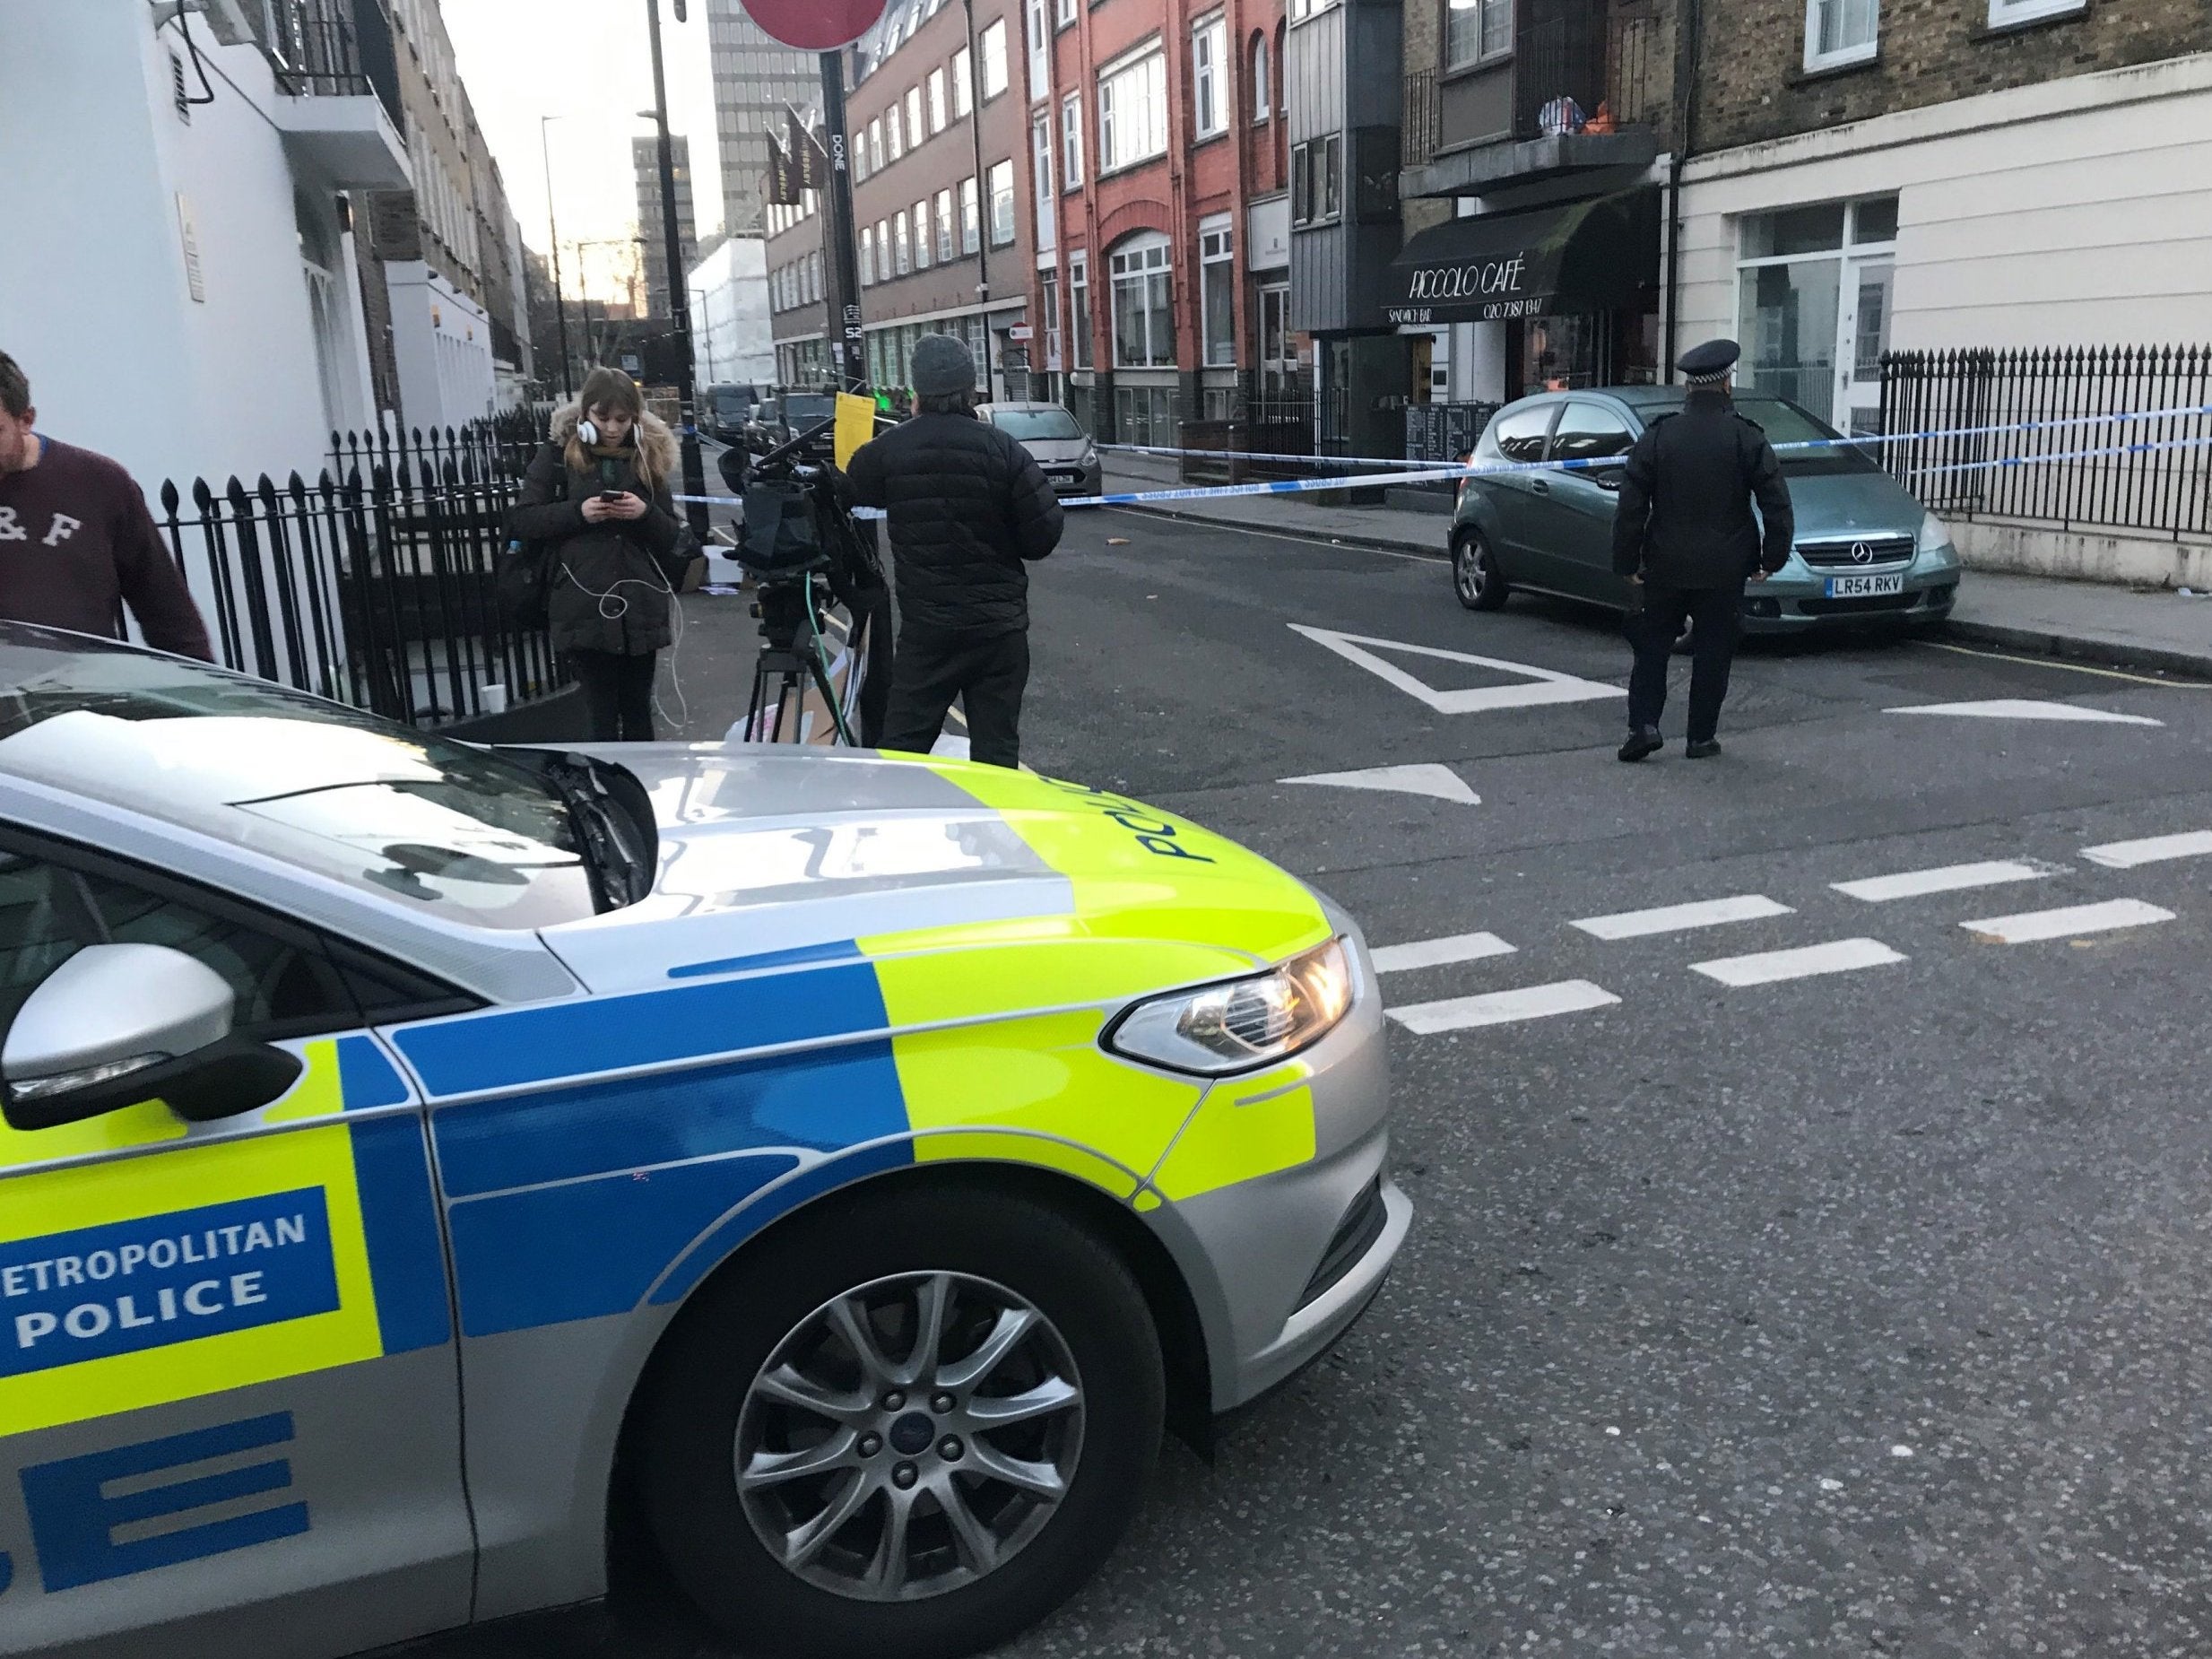 Police in Euston Street following a fatal stabbing